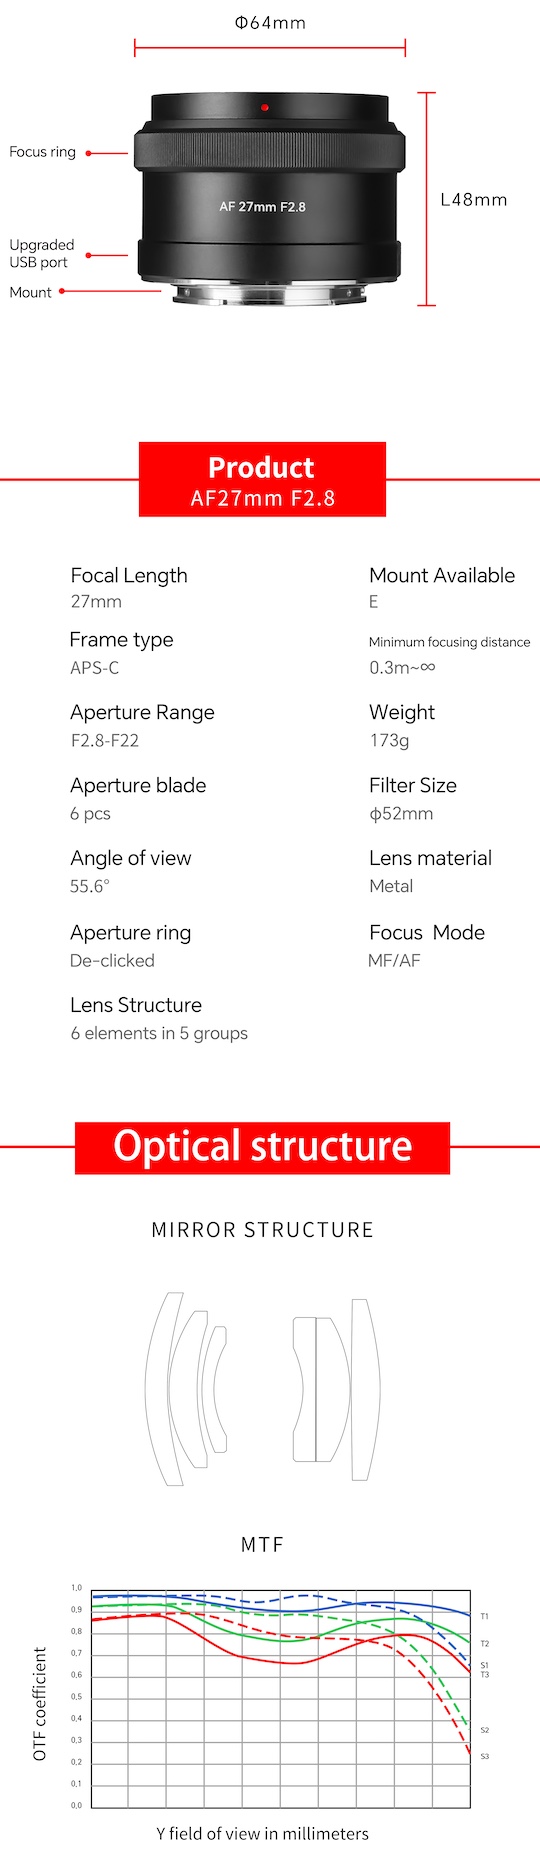 Here are the technical specifications of the upcoming 7Artisans AF 27mm f/2.8 APS-C lens for Sony E-mount